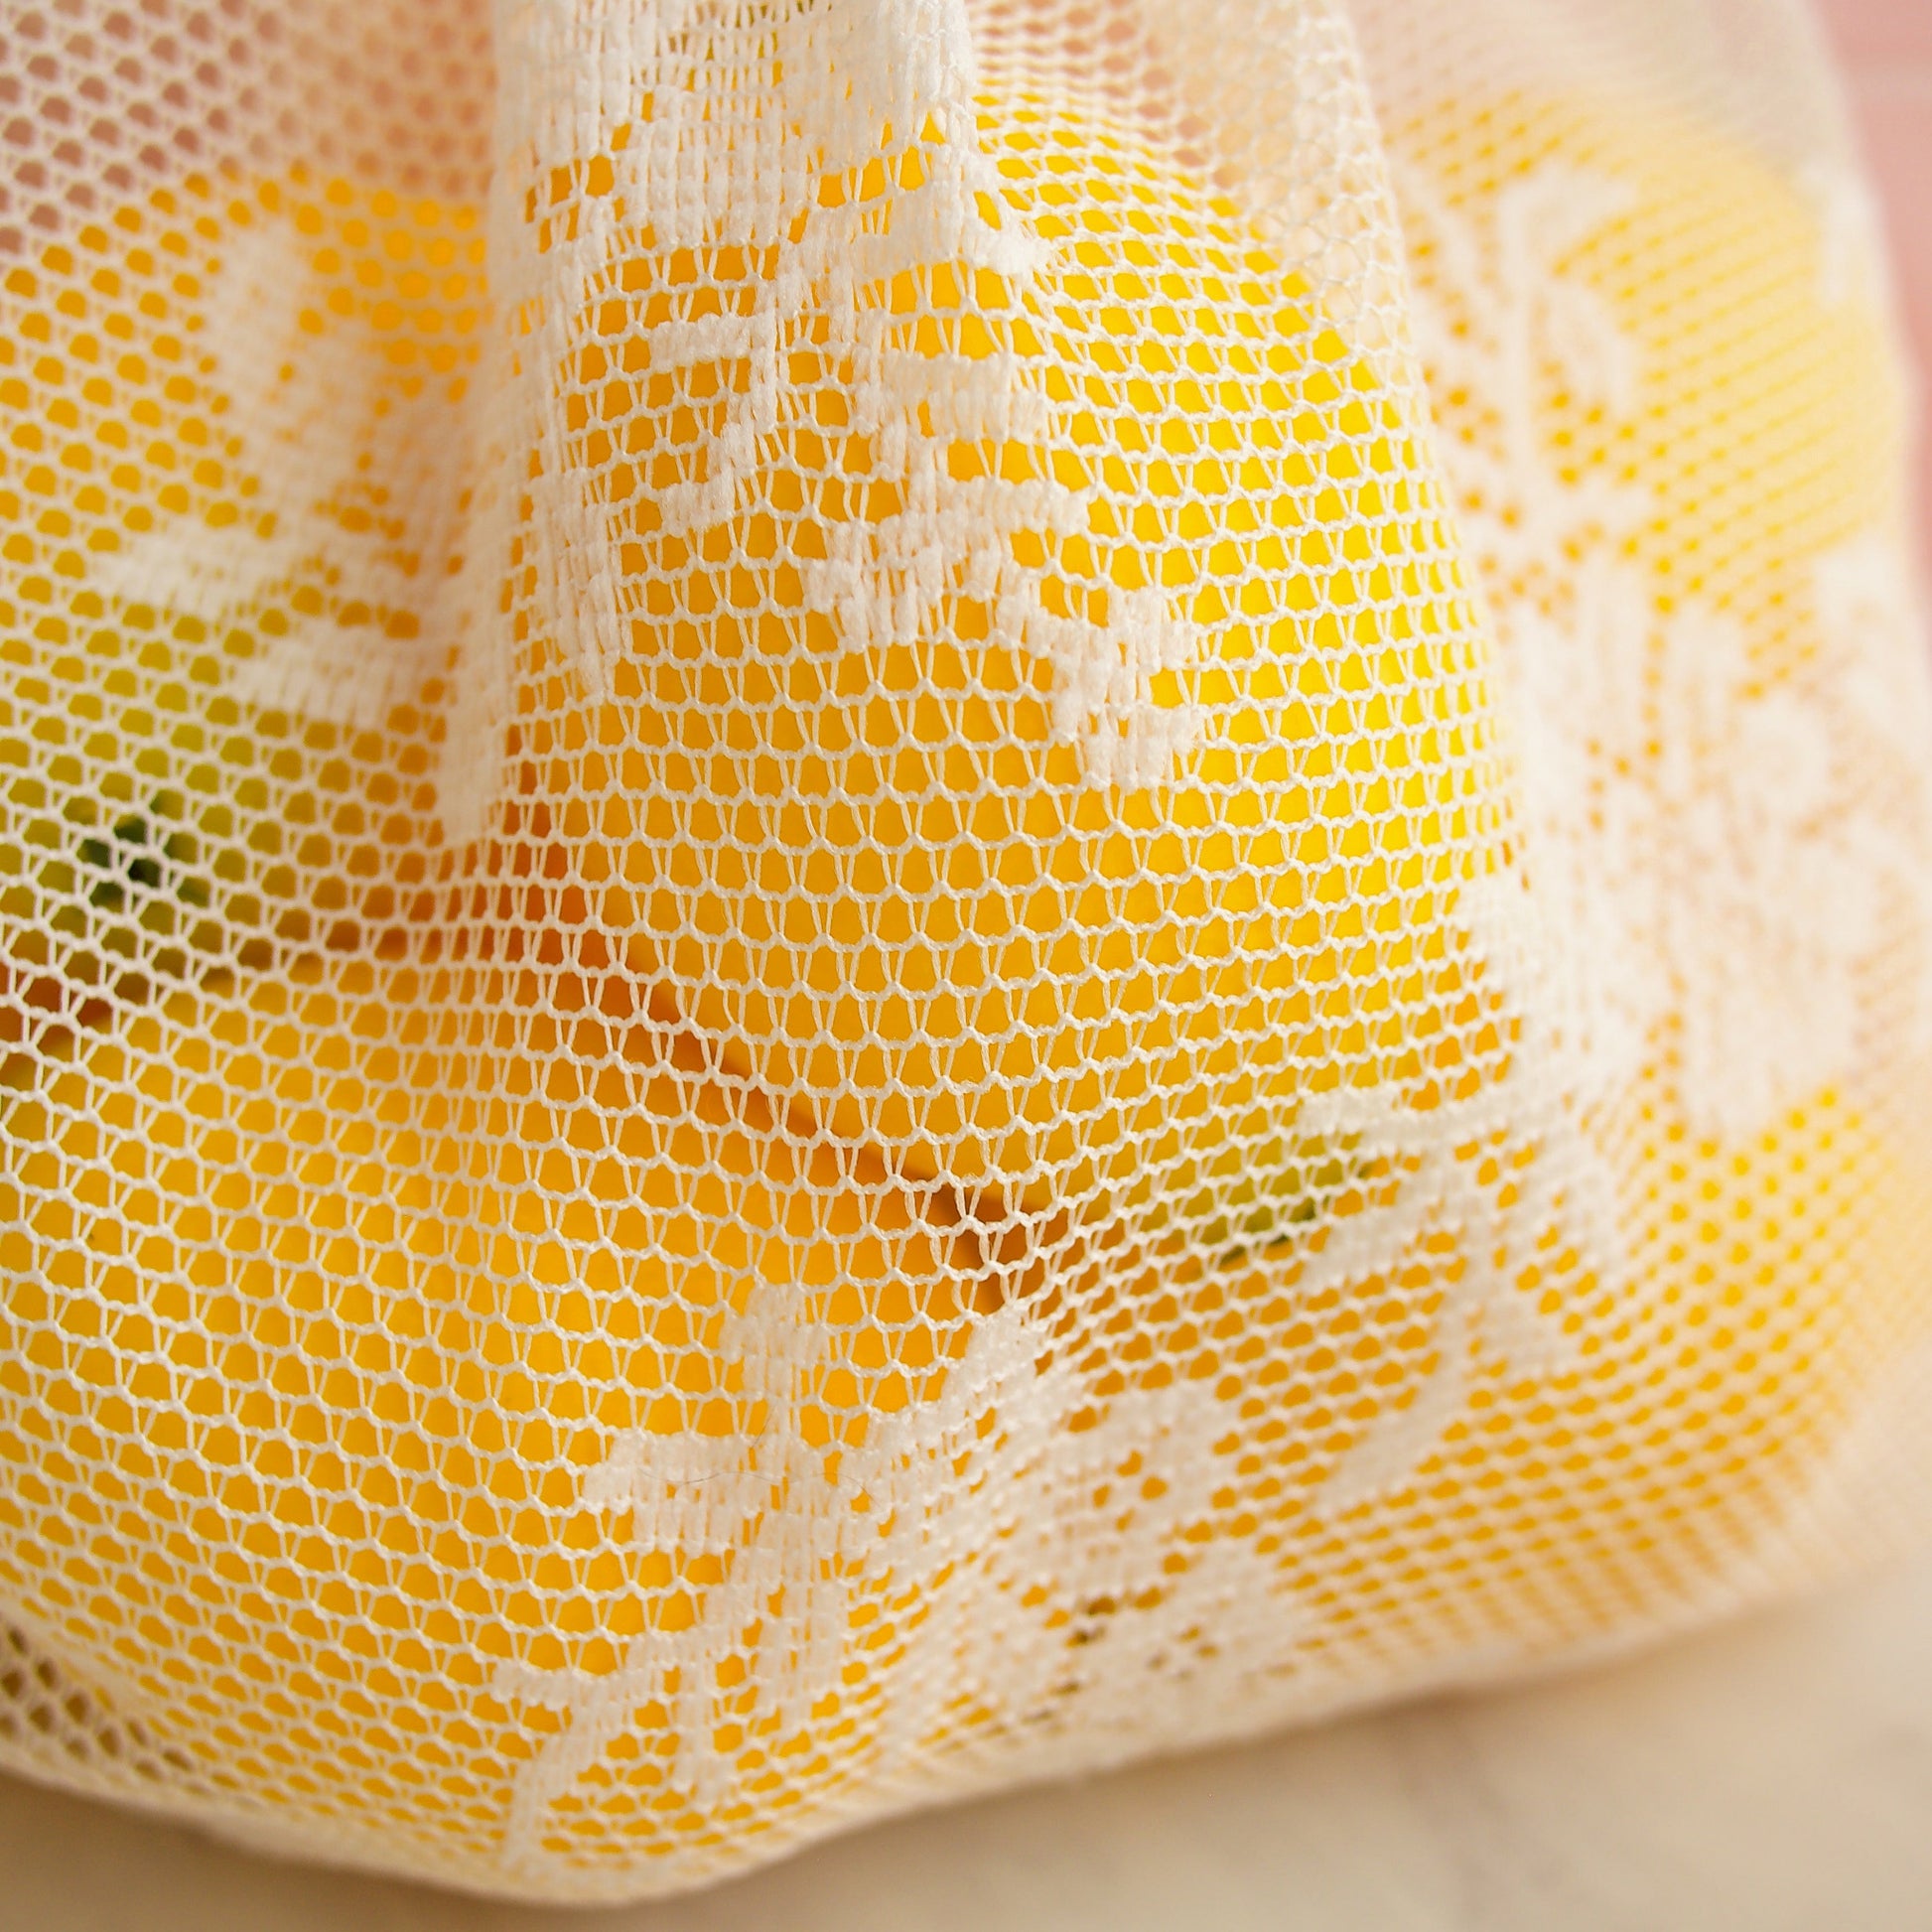 Close up image of lace on reusable lace produce bag, filled with lemons